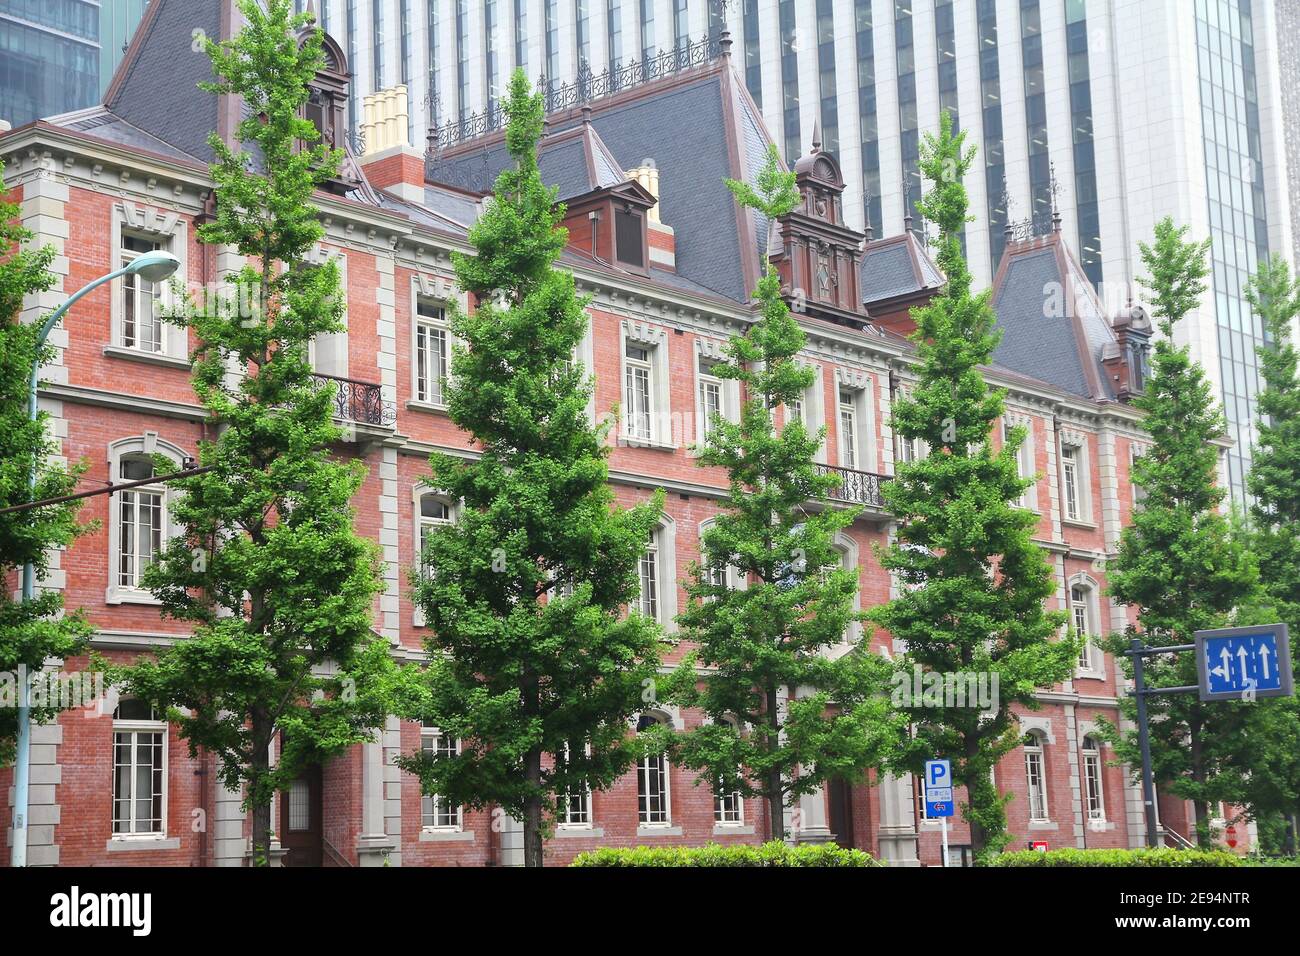 TOKYO, JAPAN - MAY 9, 2012: Mitsubishi Ichigokan Museum in Marunouchi district, Tokyo. The Queen Anne-style art museum was opened in 2010. Stock Photo